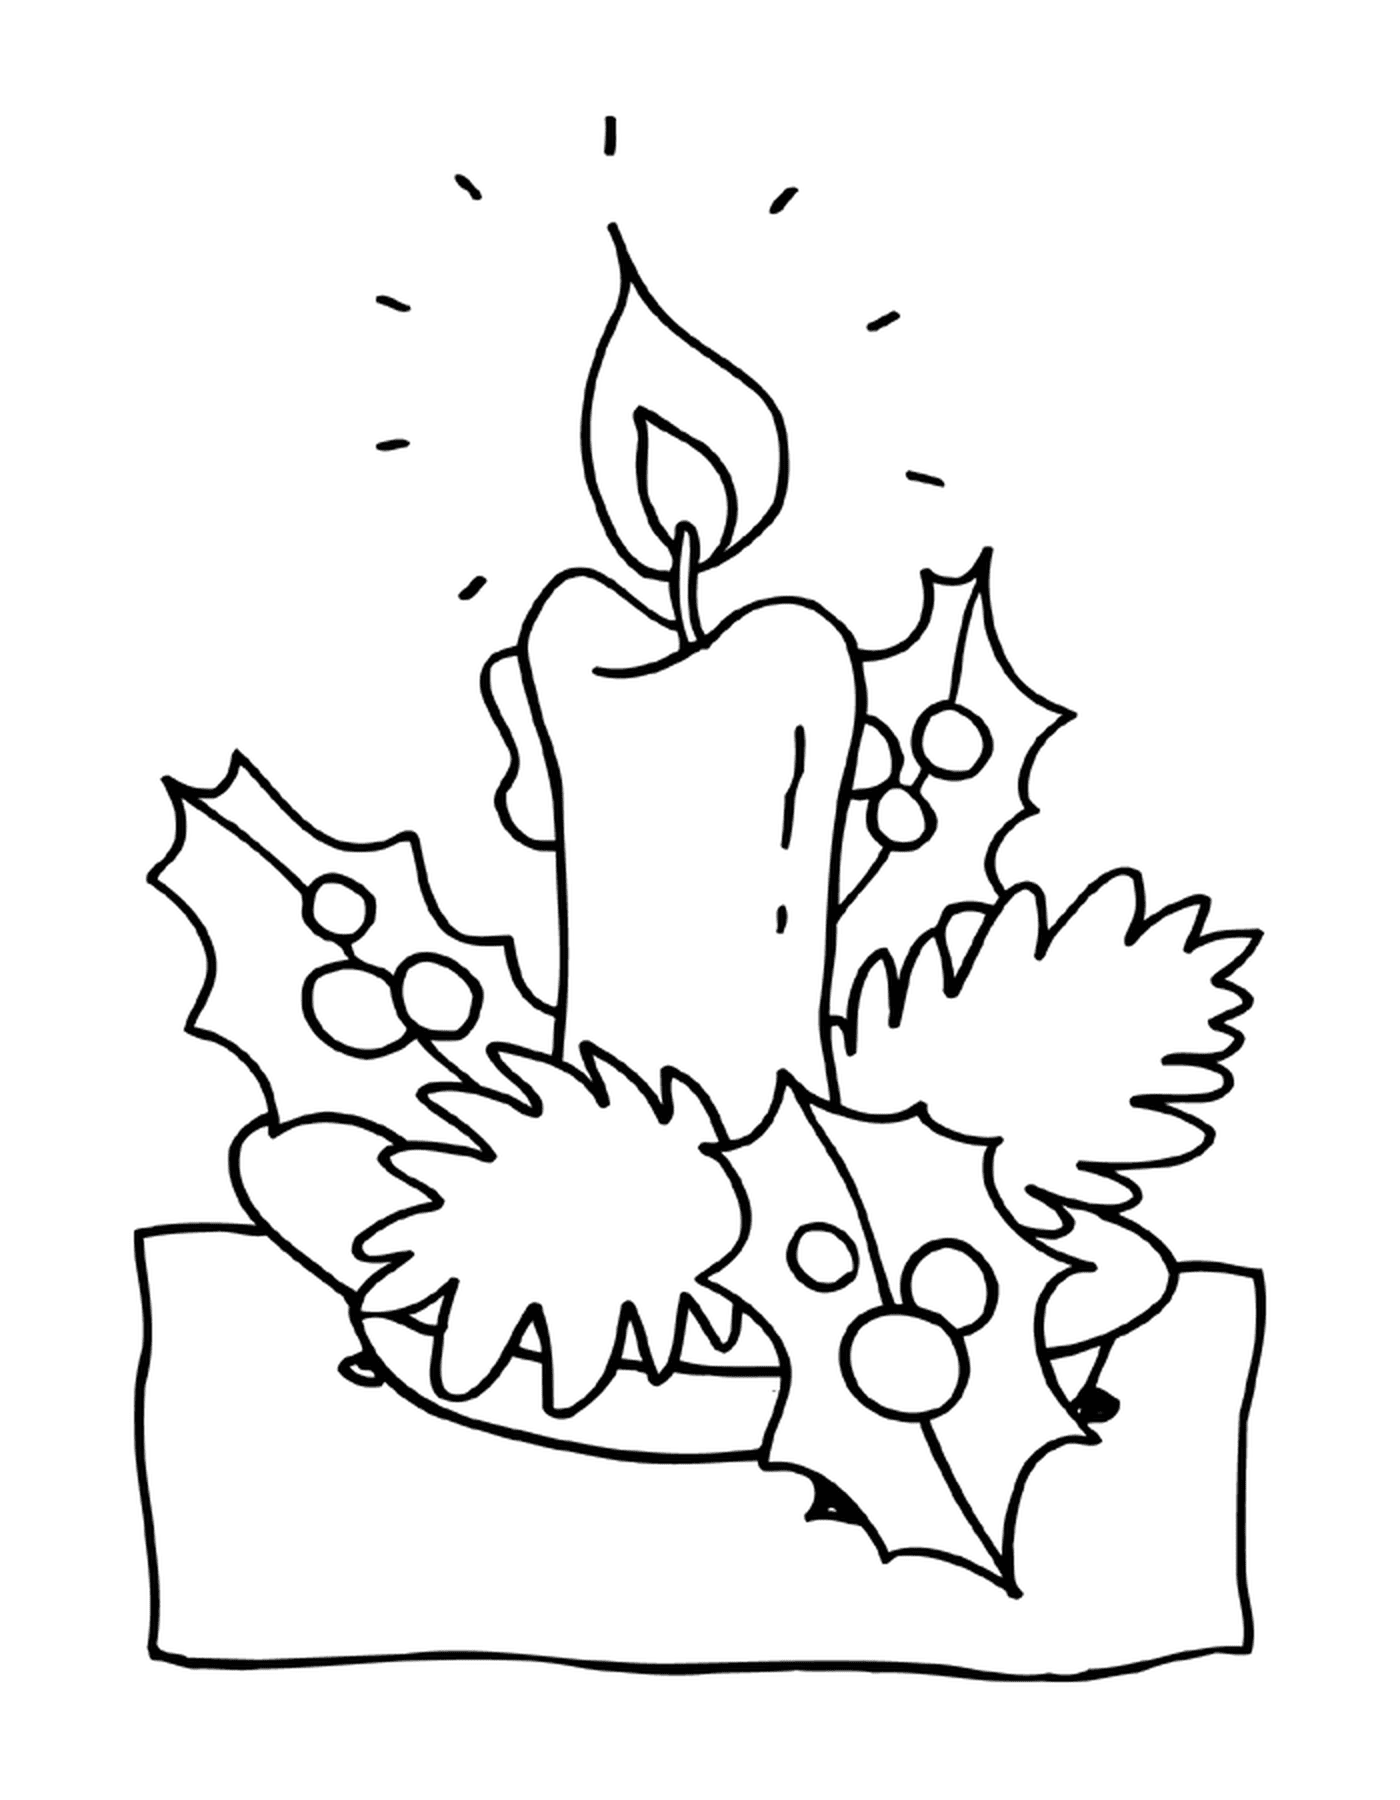  A candle 